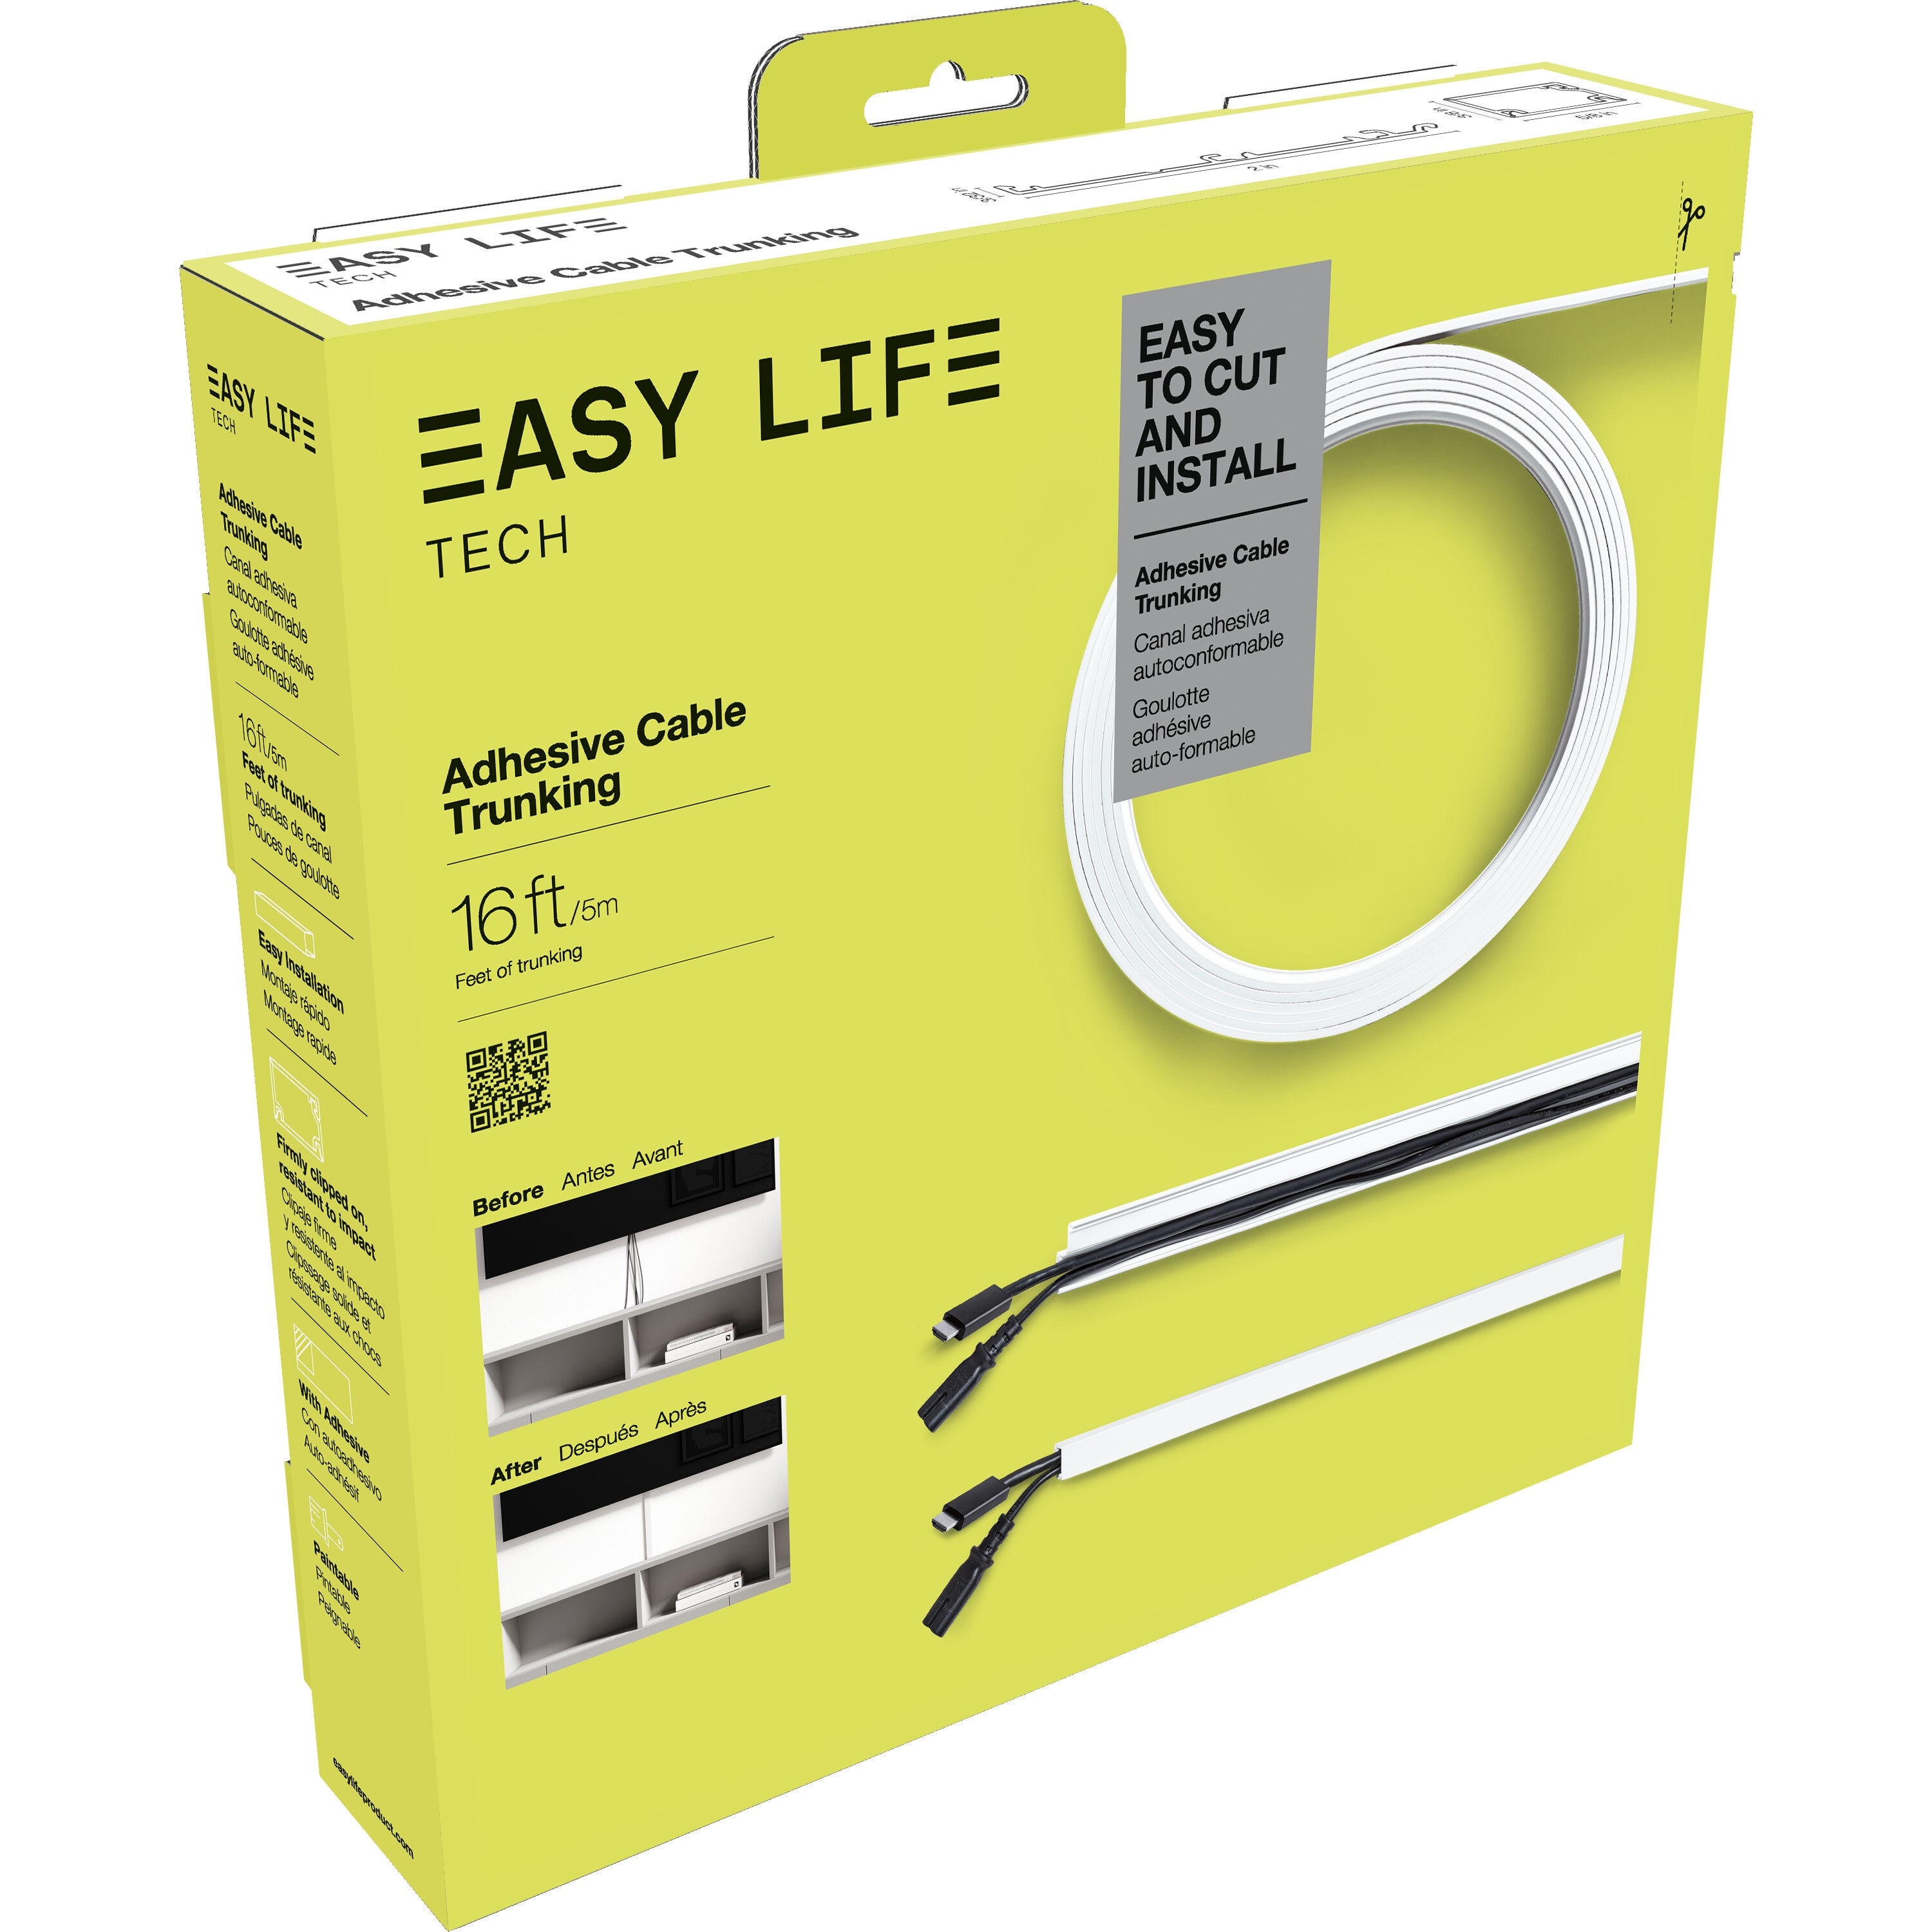 EasyLife Tech White PVC Raceway Kit - 6 Pieces, Adhesive Backing, Paintable, 16ft Cord Concealment, Easy Installation - Commercial/Residential -  71502A-EL